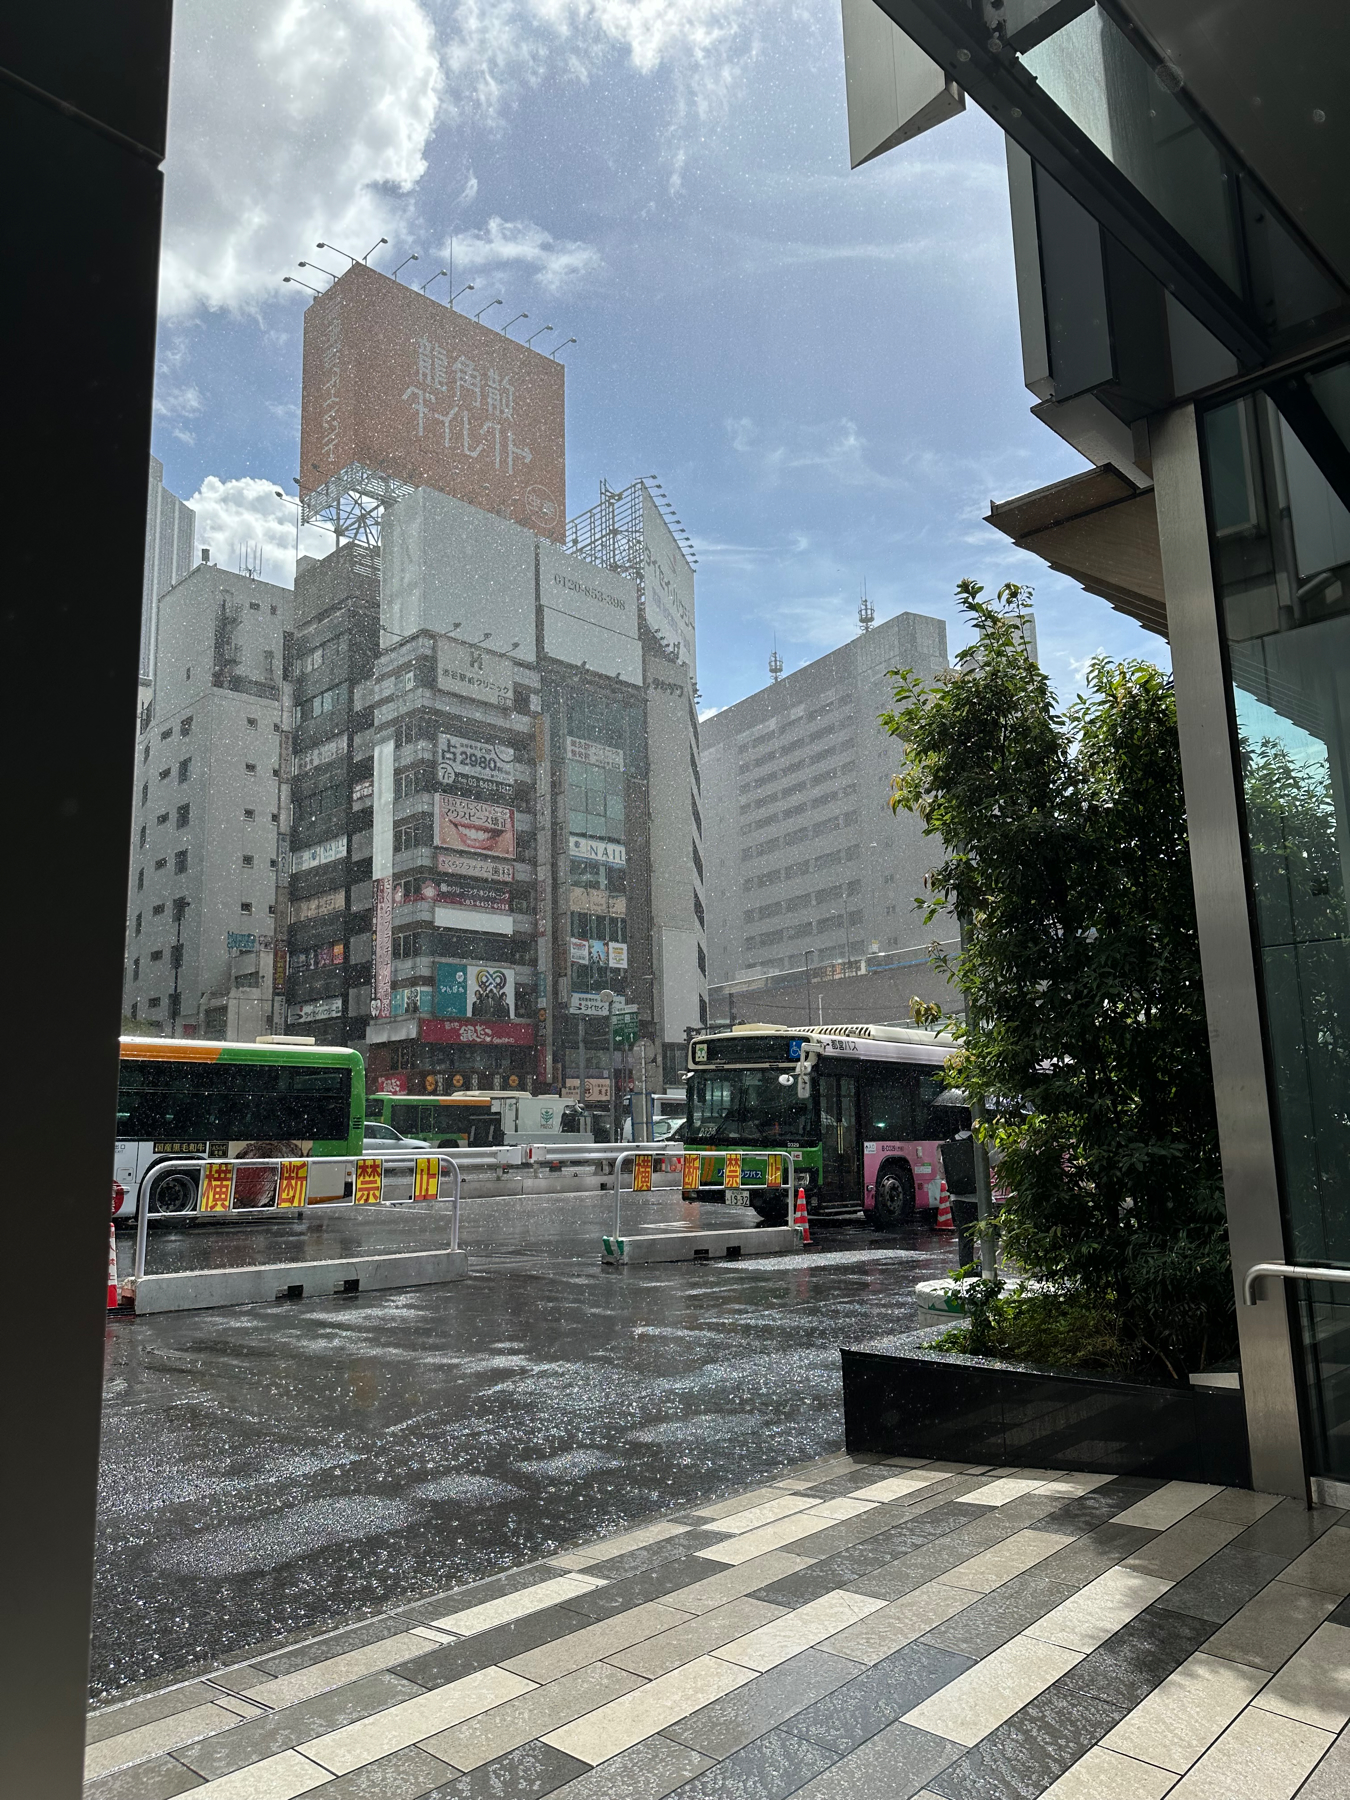 The rain pouring onto Shibuya bus station whilst the sun still shines